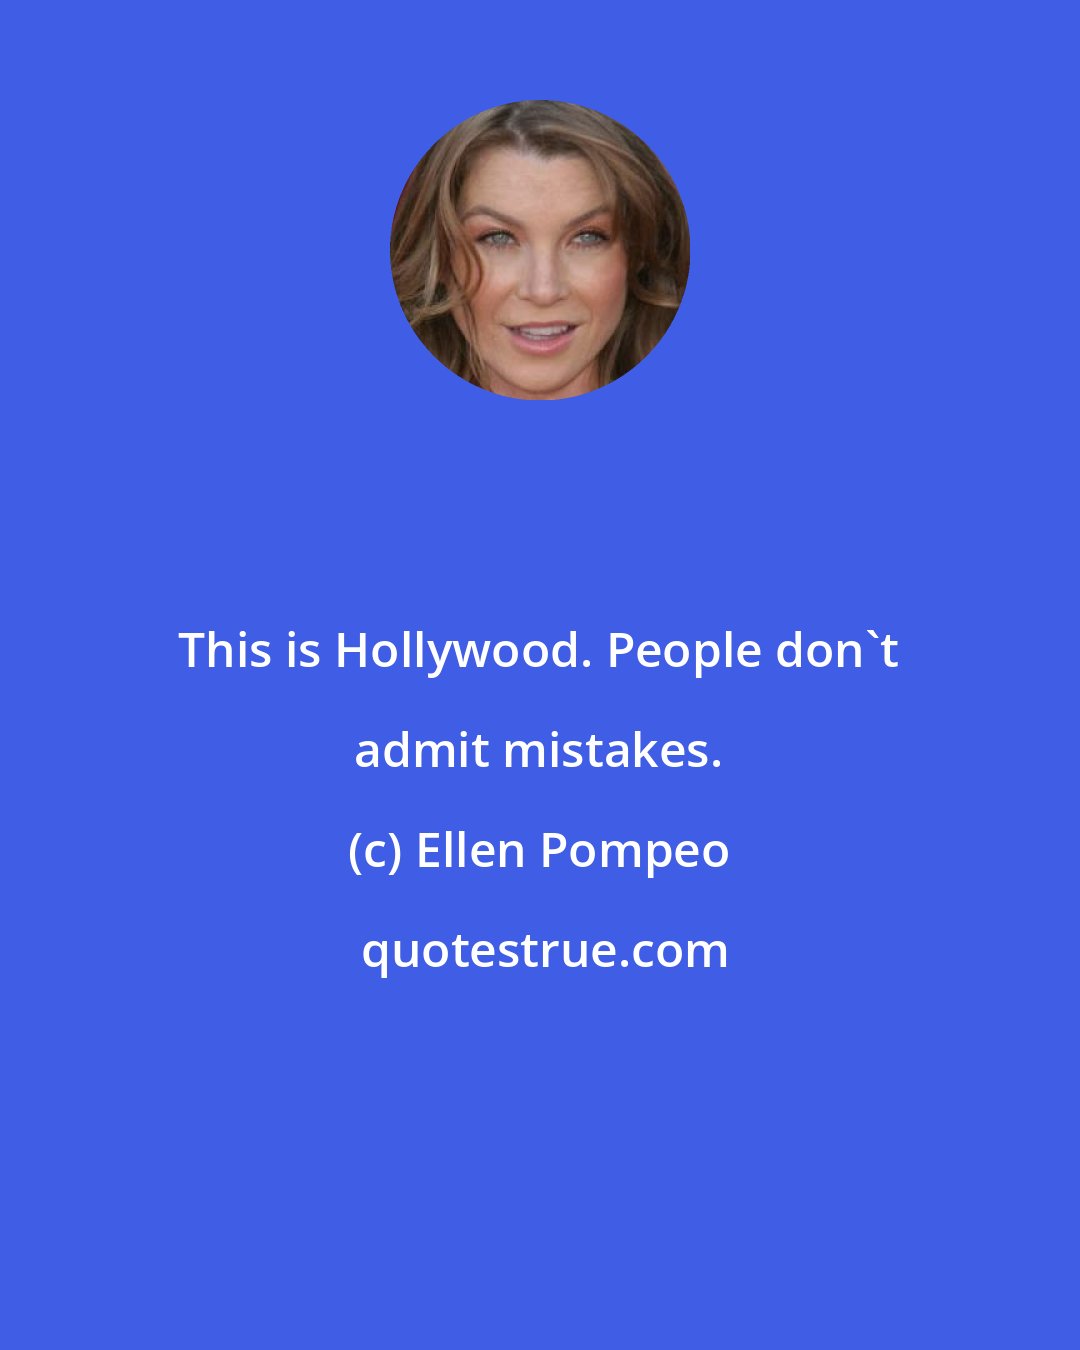 Ellen Pompeo: This is Hollywood. People don't admit mistakes.